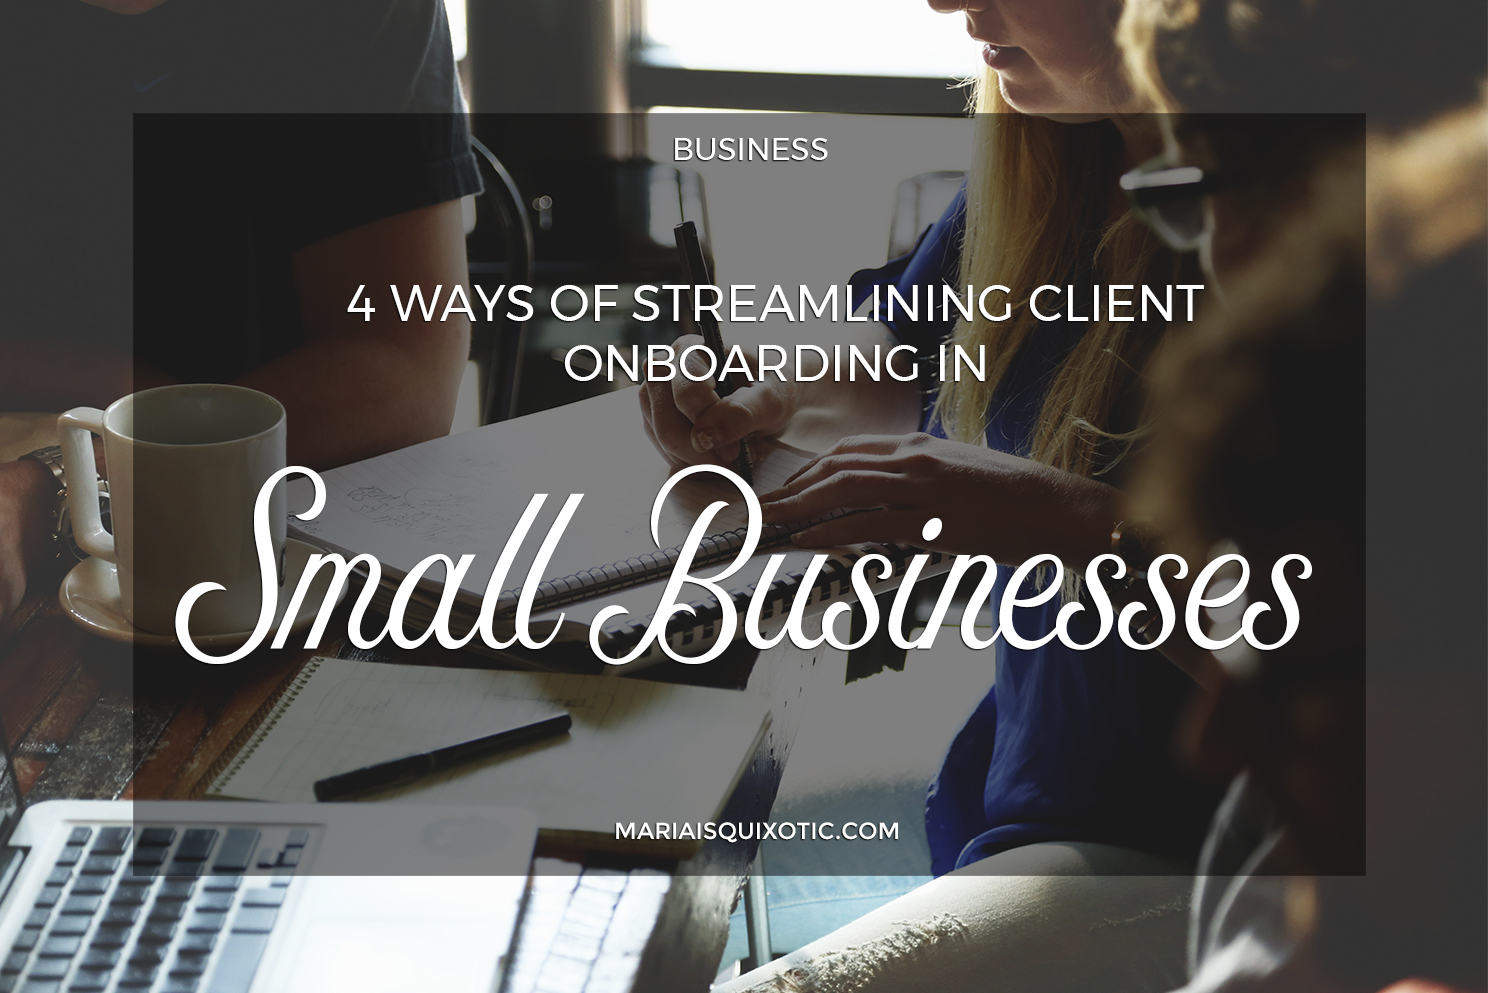 4 Ways of Streamlining Client Onboarding in Small Businesses